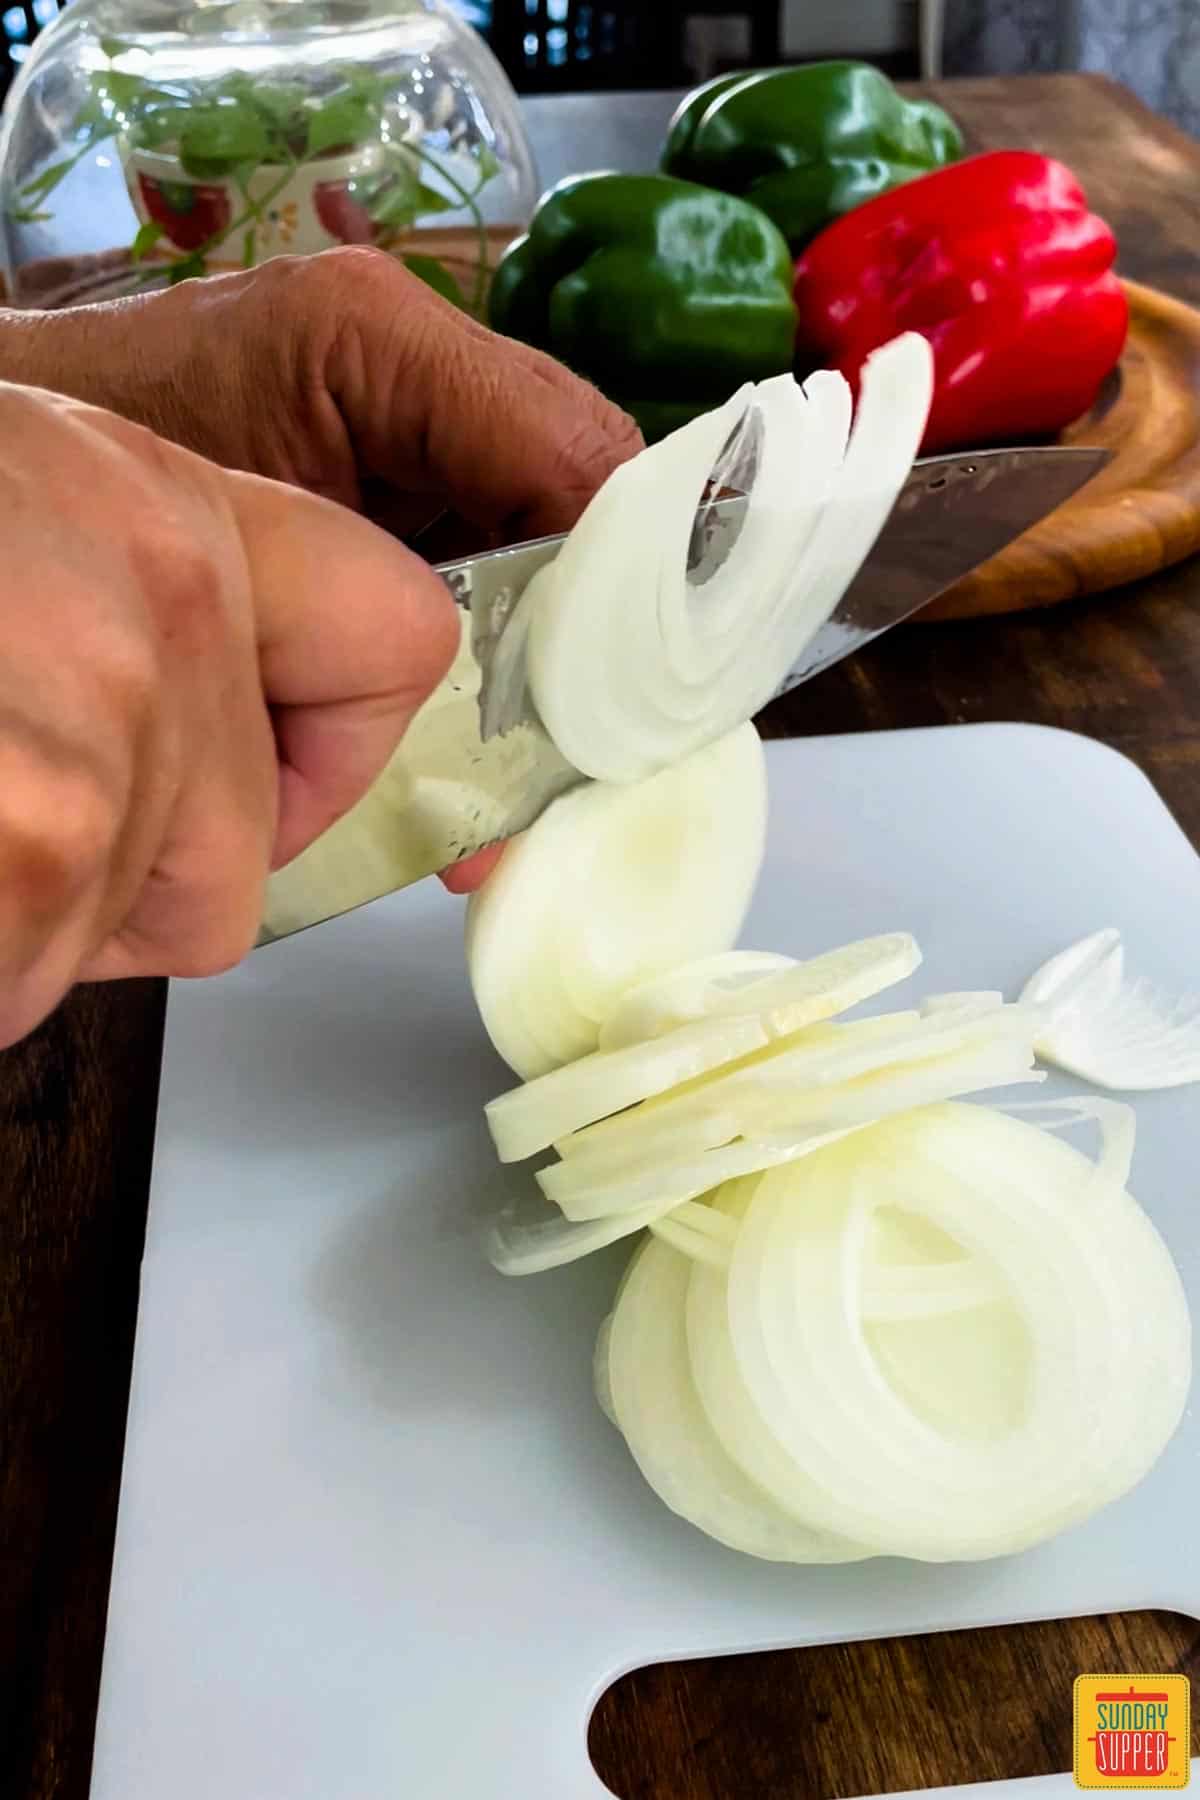 Onions cut into slices on a cutting board